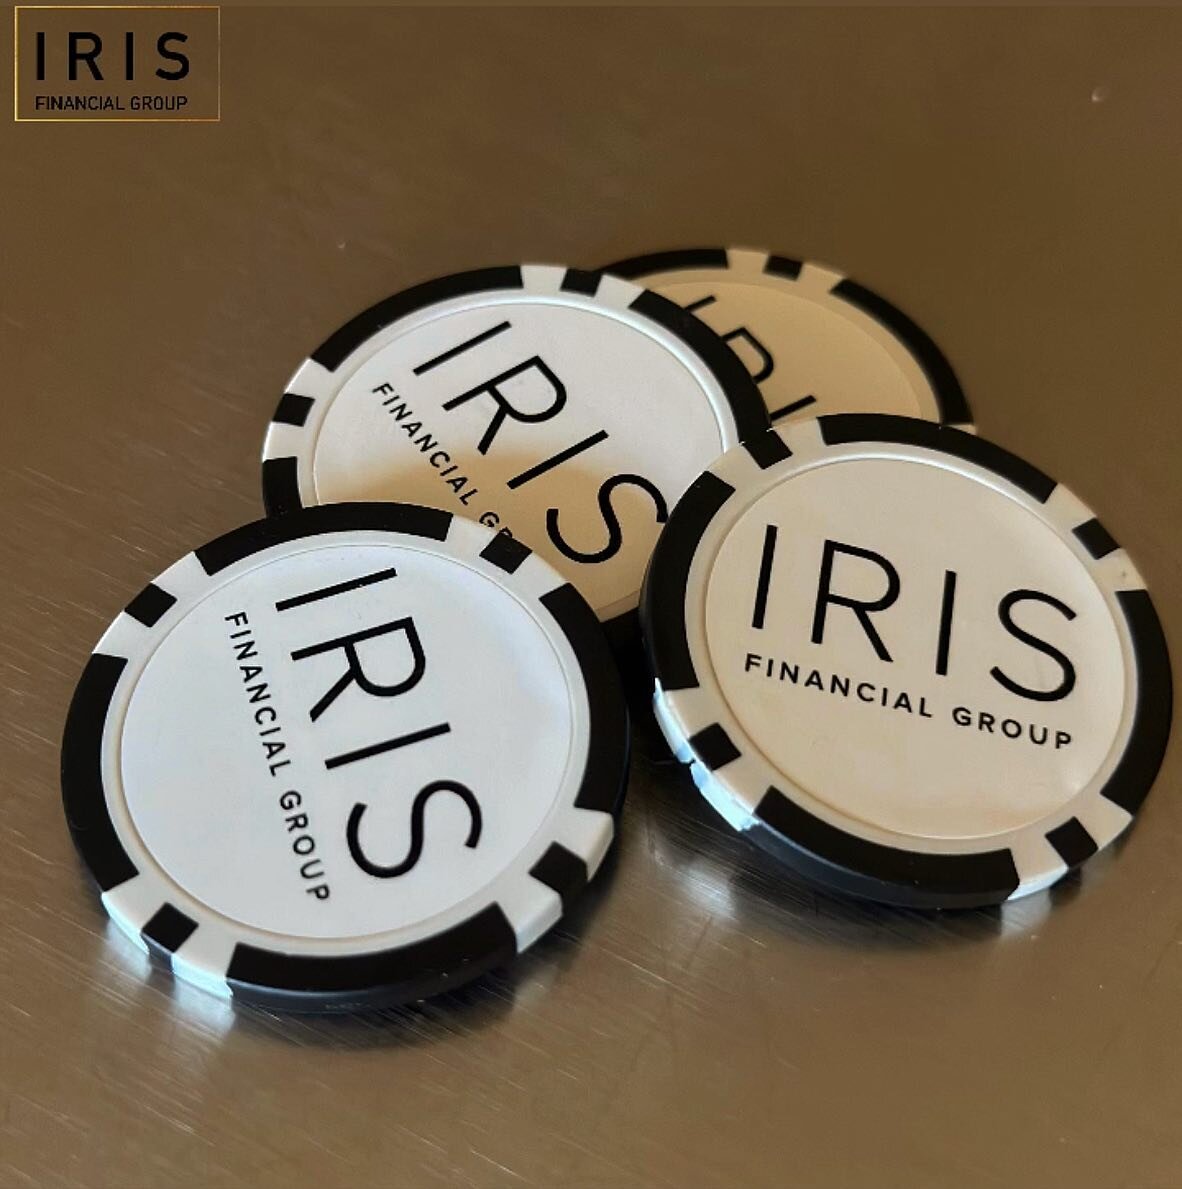 Iris getting ready for the Nashville Jr Chamber of Commerce golf Invitational ⛳️ sponsoring a hole at the Twelve Rivers Golf Course.

#iris #accounting #irisfinancialgroup 
#financialeducation #financialgoals #business #bookkeeping #smallbusinessowne